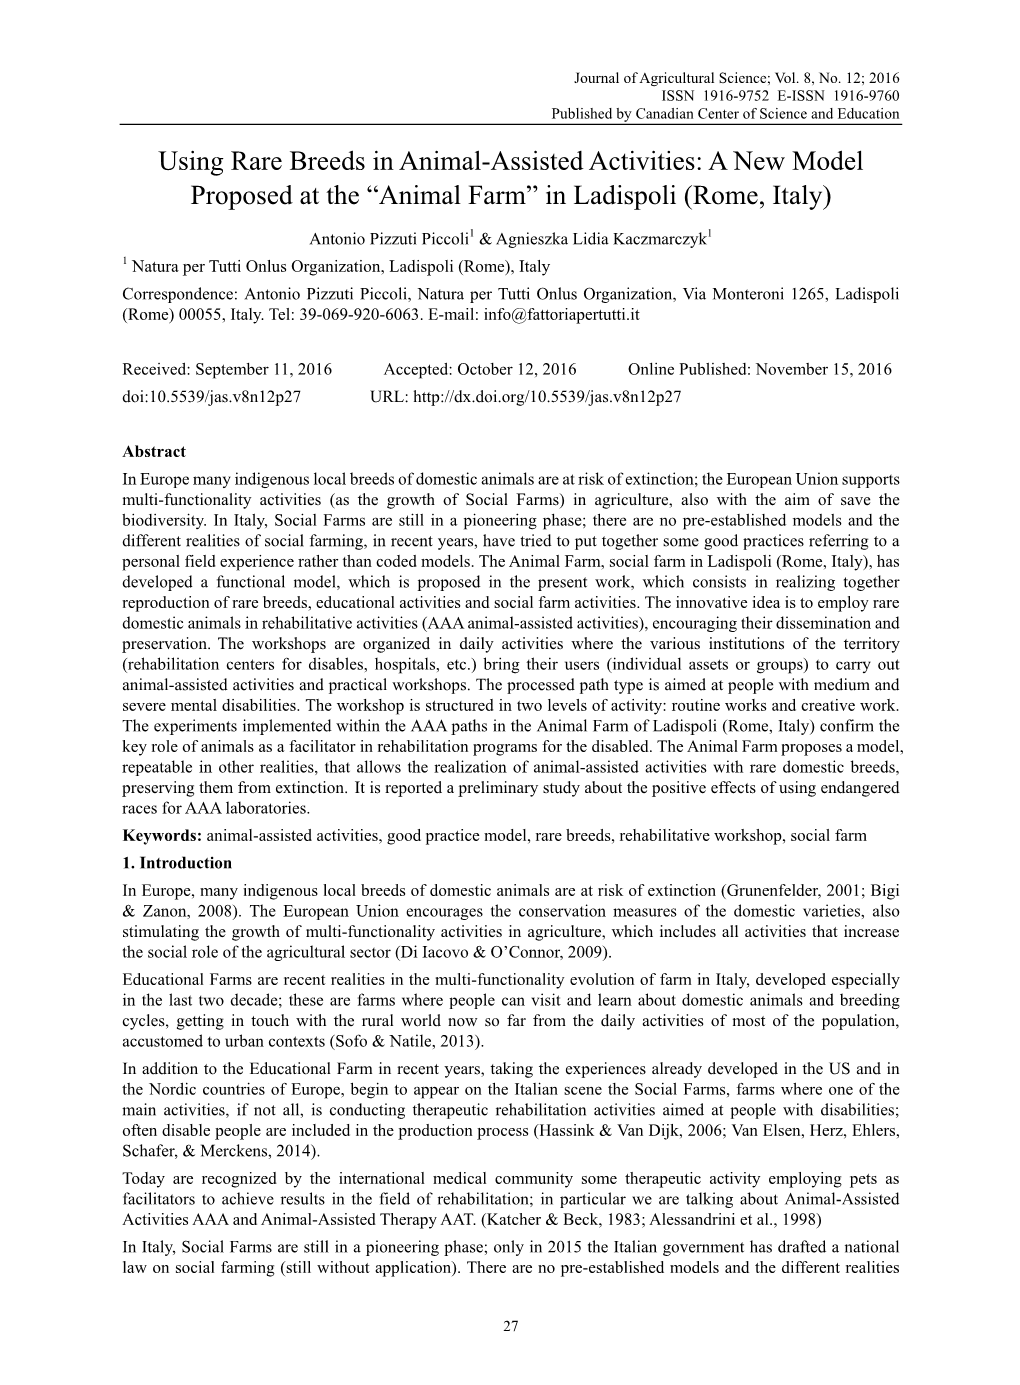 Using Rare Breeds in Animal-Assisted Activities: a New Model Proposed at the “Animal Farm” in Ladispoli (Rome, Italy)